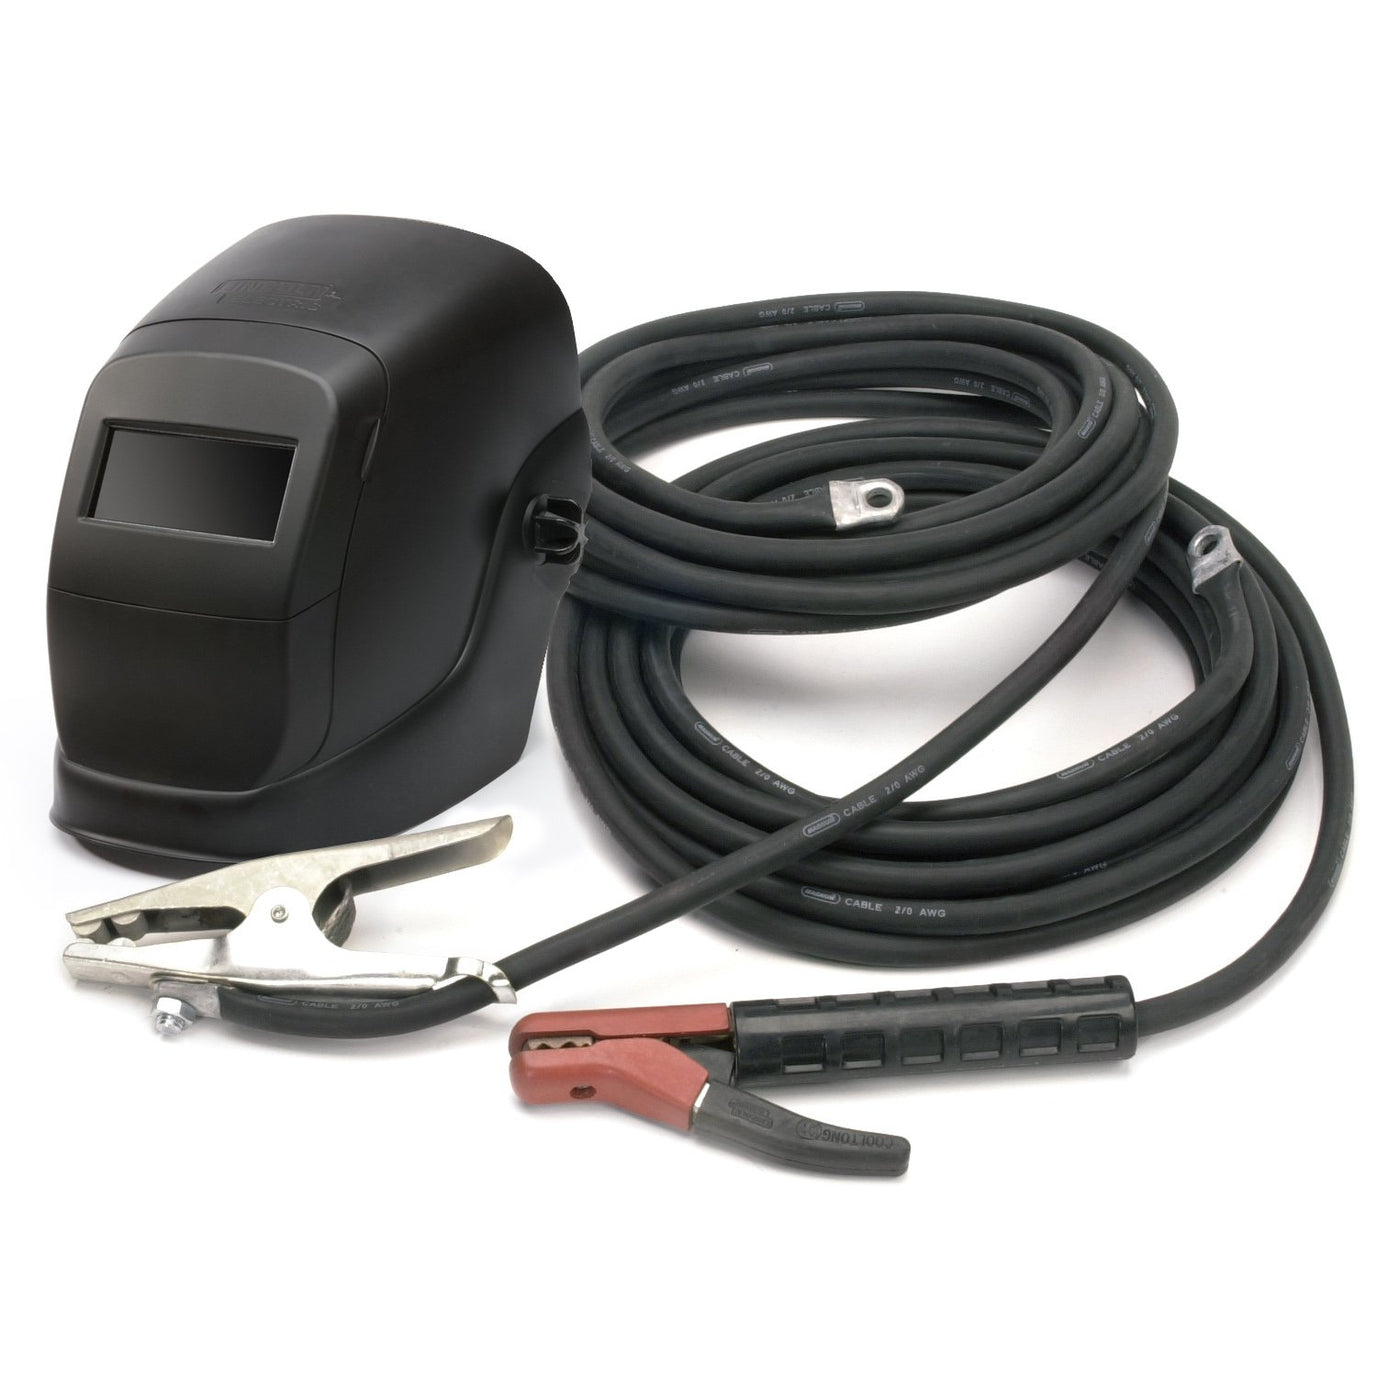 Lincoln 400 Amp Accessory Kit - K704 — Baker's Gas & Welding Supplies, Inc.